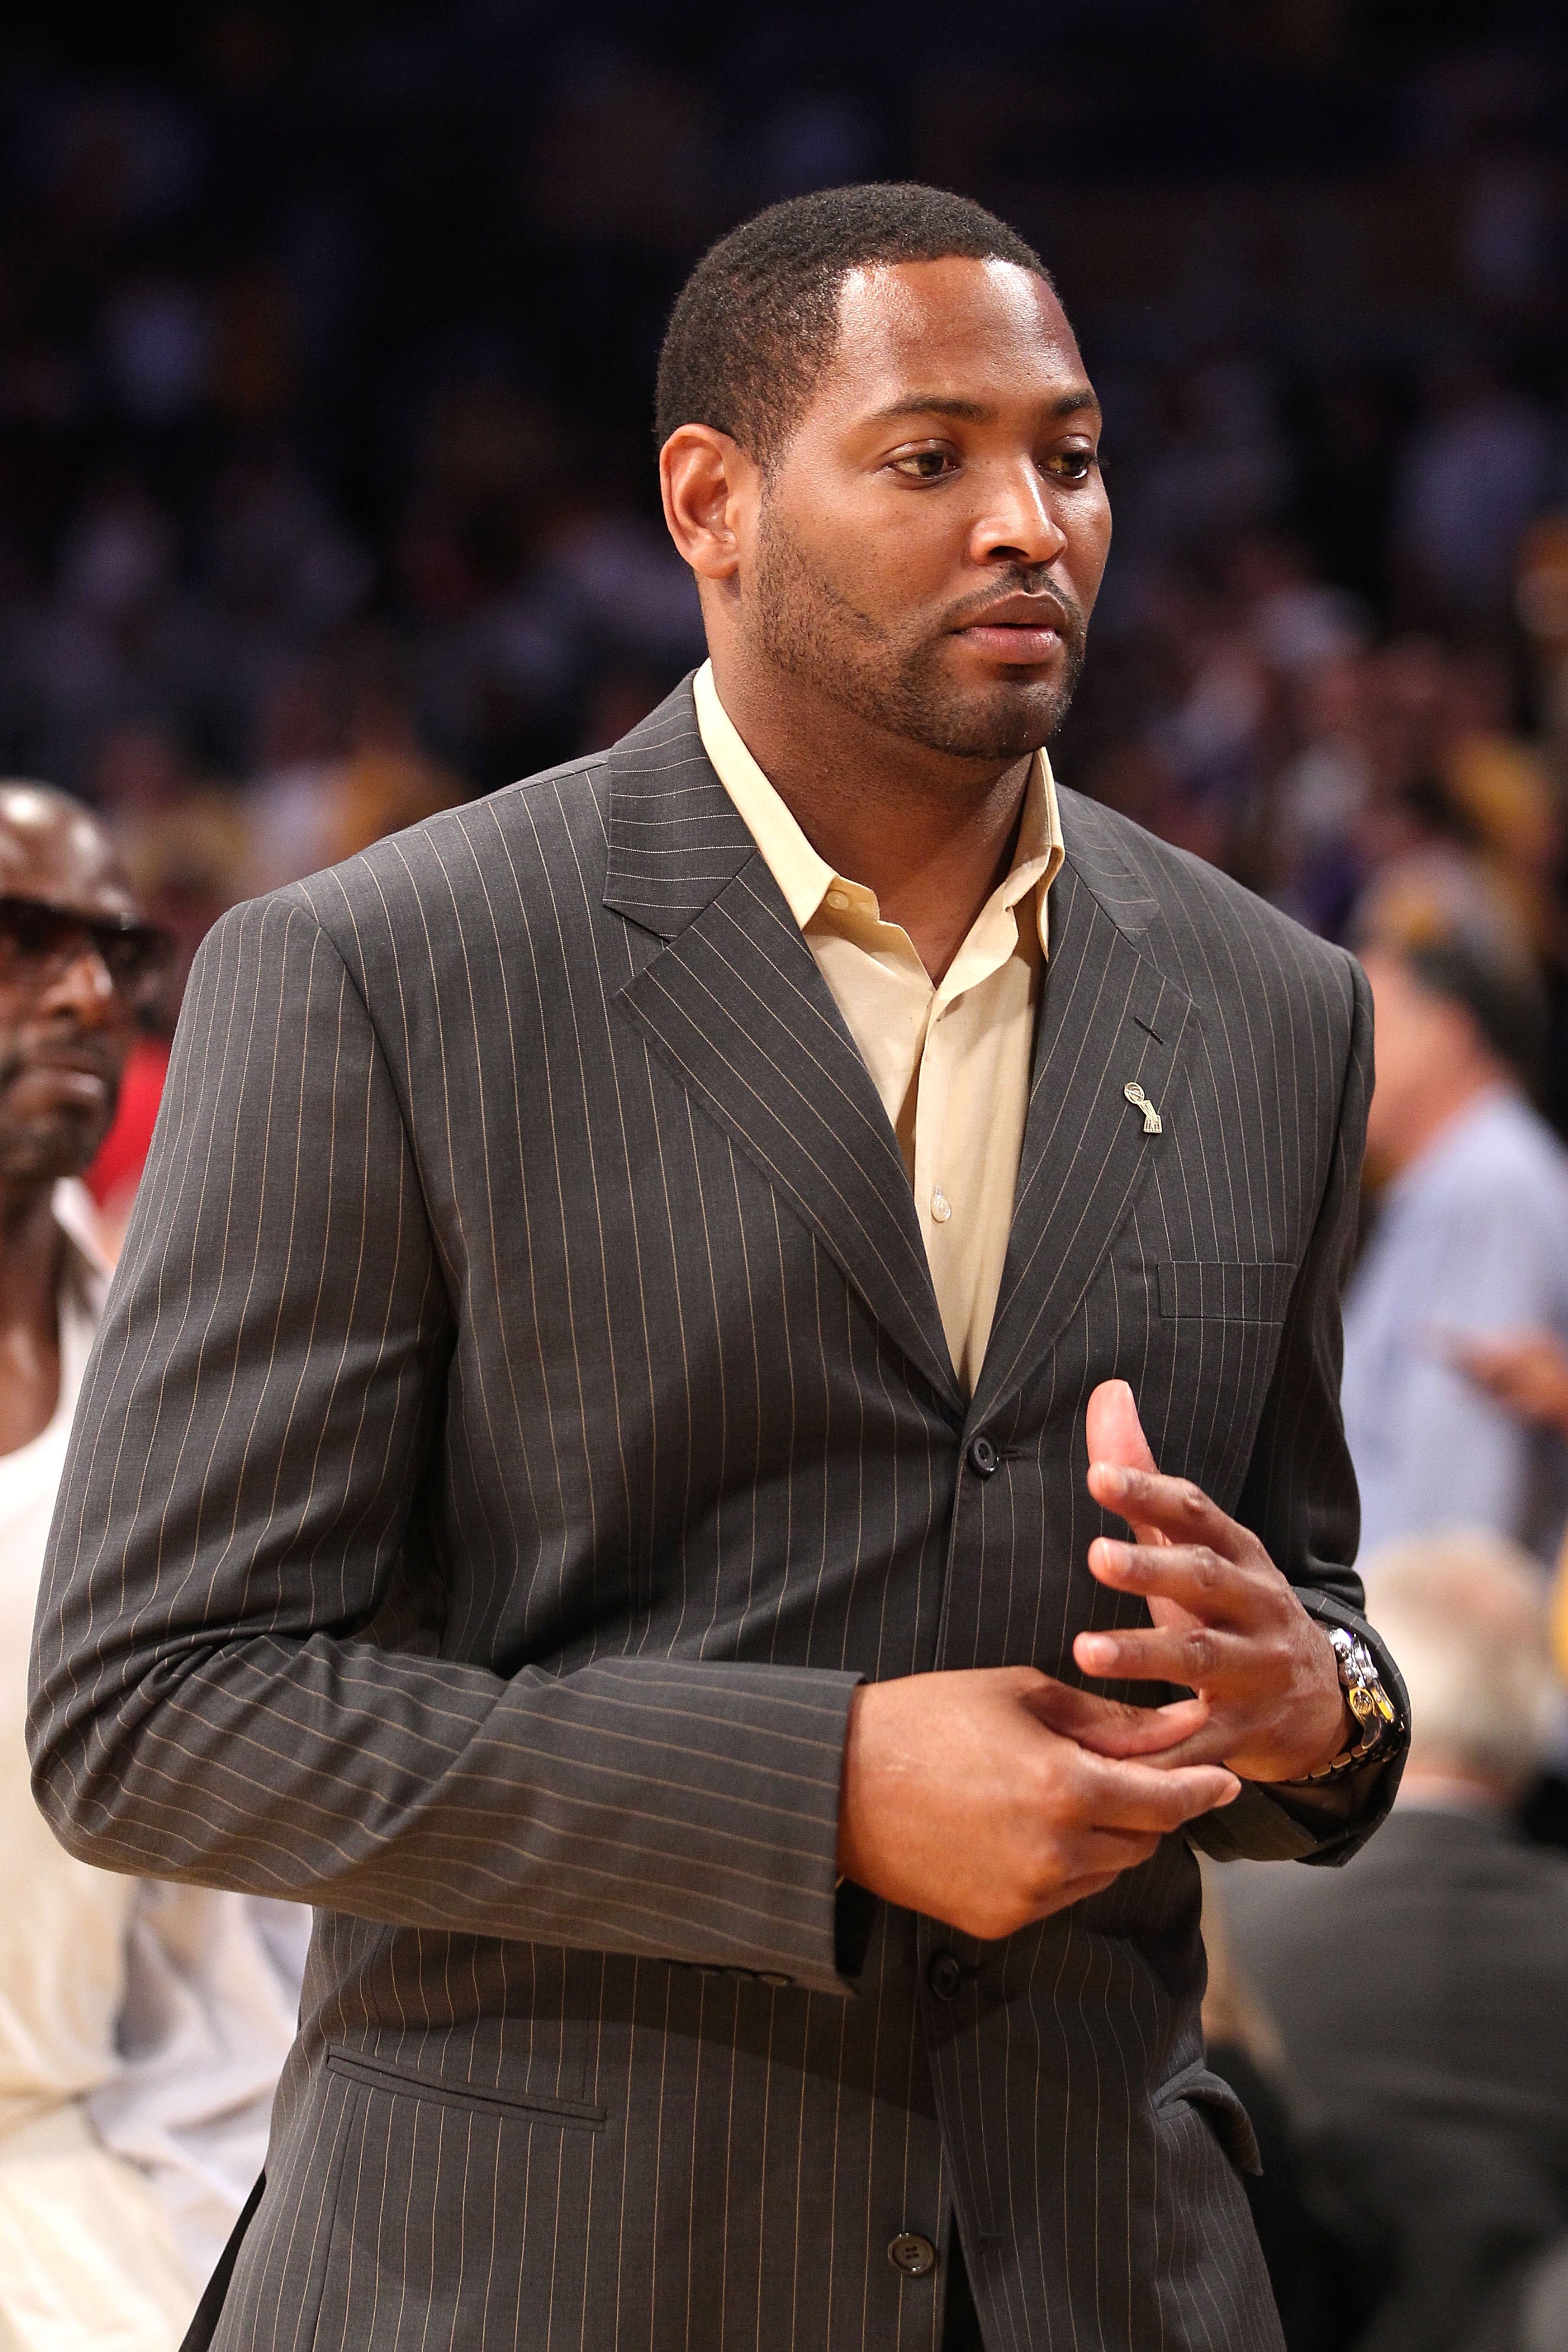 LOS ANGELES, CA - JUNE 06:  Former Los Angeles Laker' Robert Horry attends Game Two of the 2010 NBA Finals between the Boston Celtics and the Los Angeles Lakers at Staples Center on June 6, 2010 in Los Angeles, California. NOTE TO USER: User expressly ack